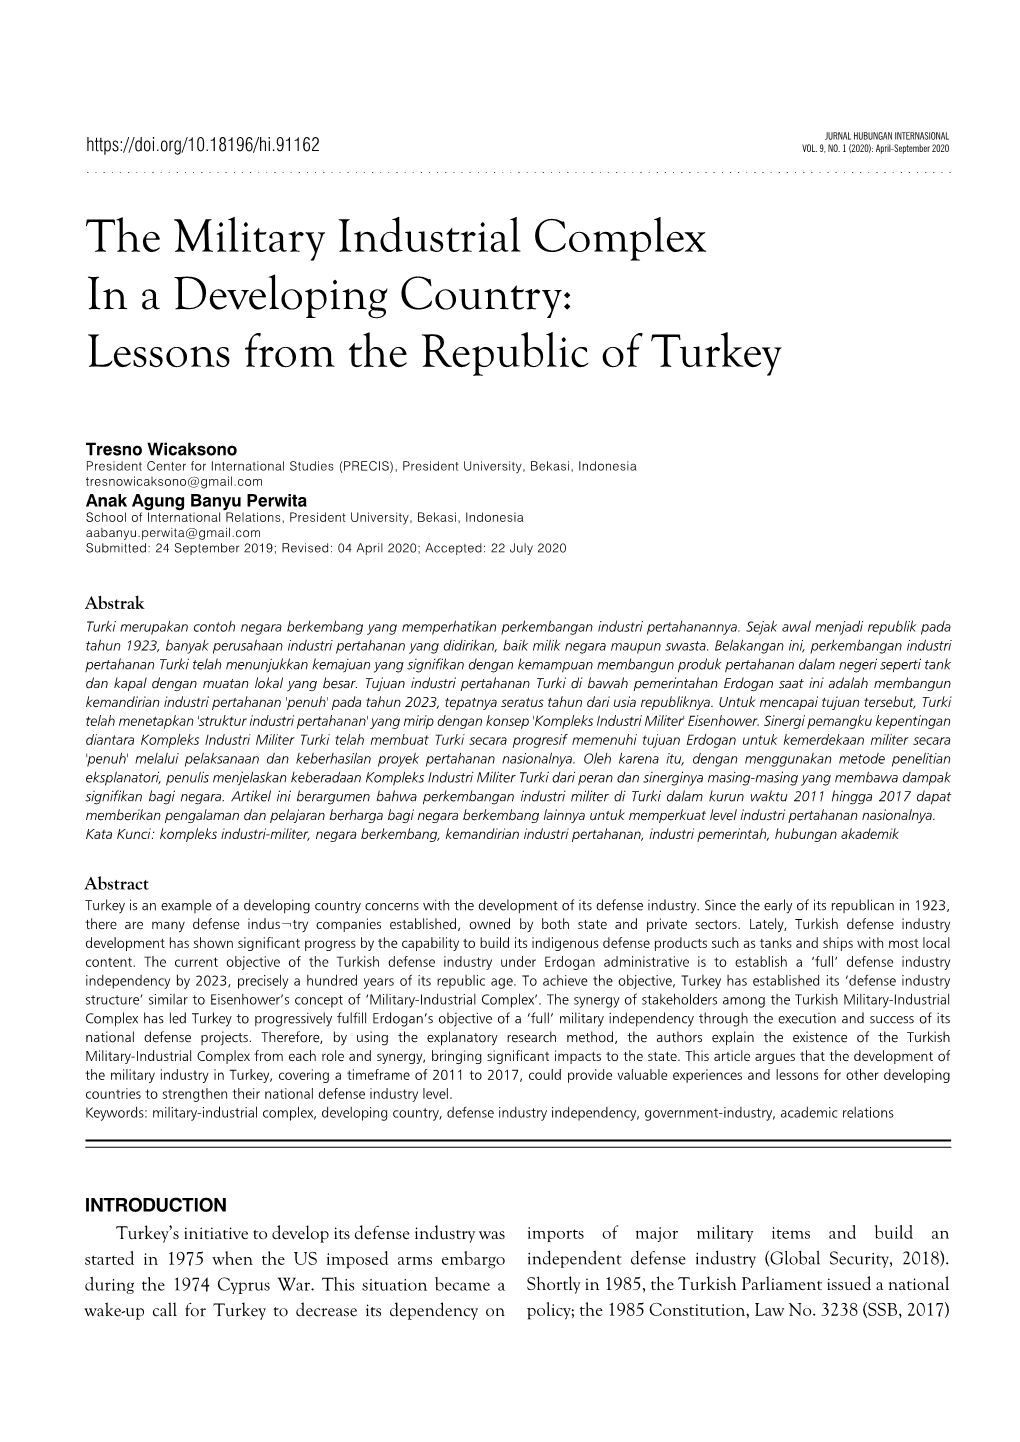 The Military Industrial Complex in a Developing Country: Lessons from the Republic of Turkey